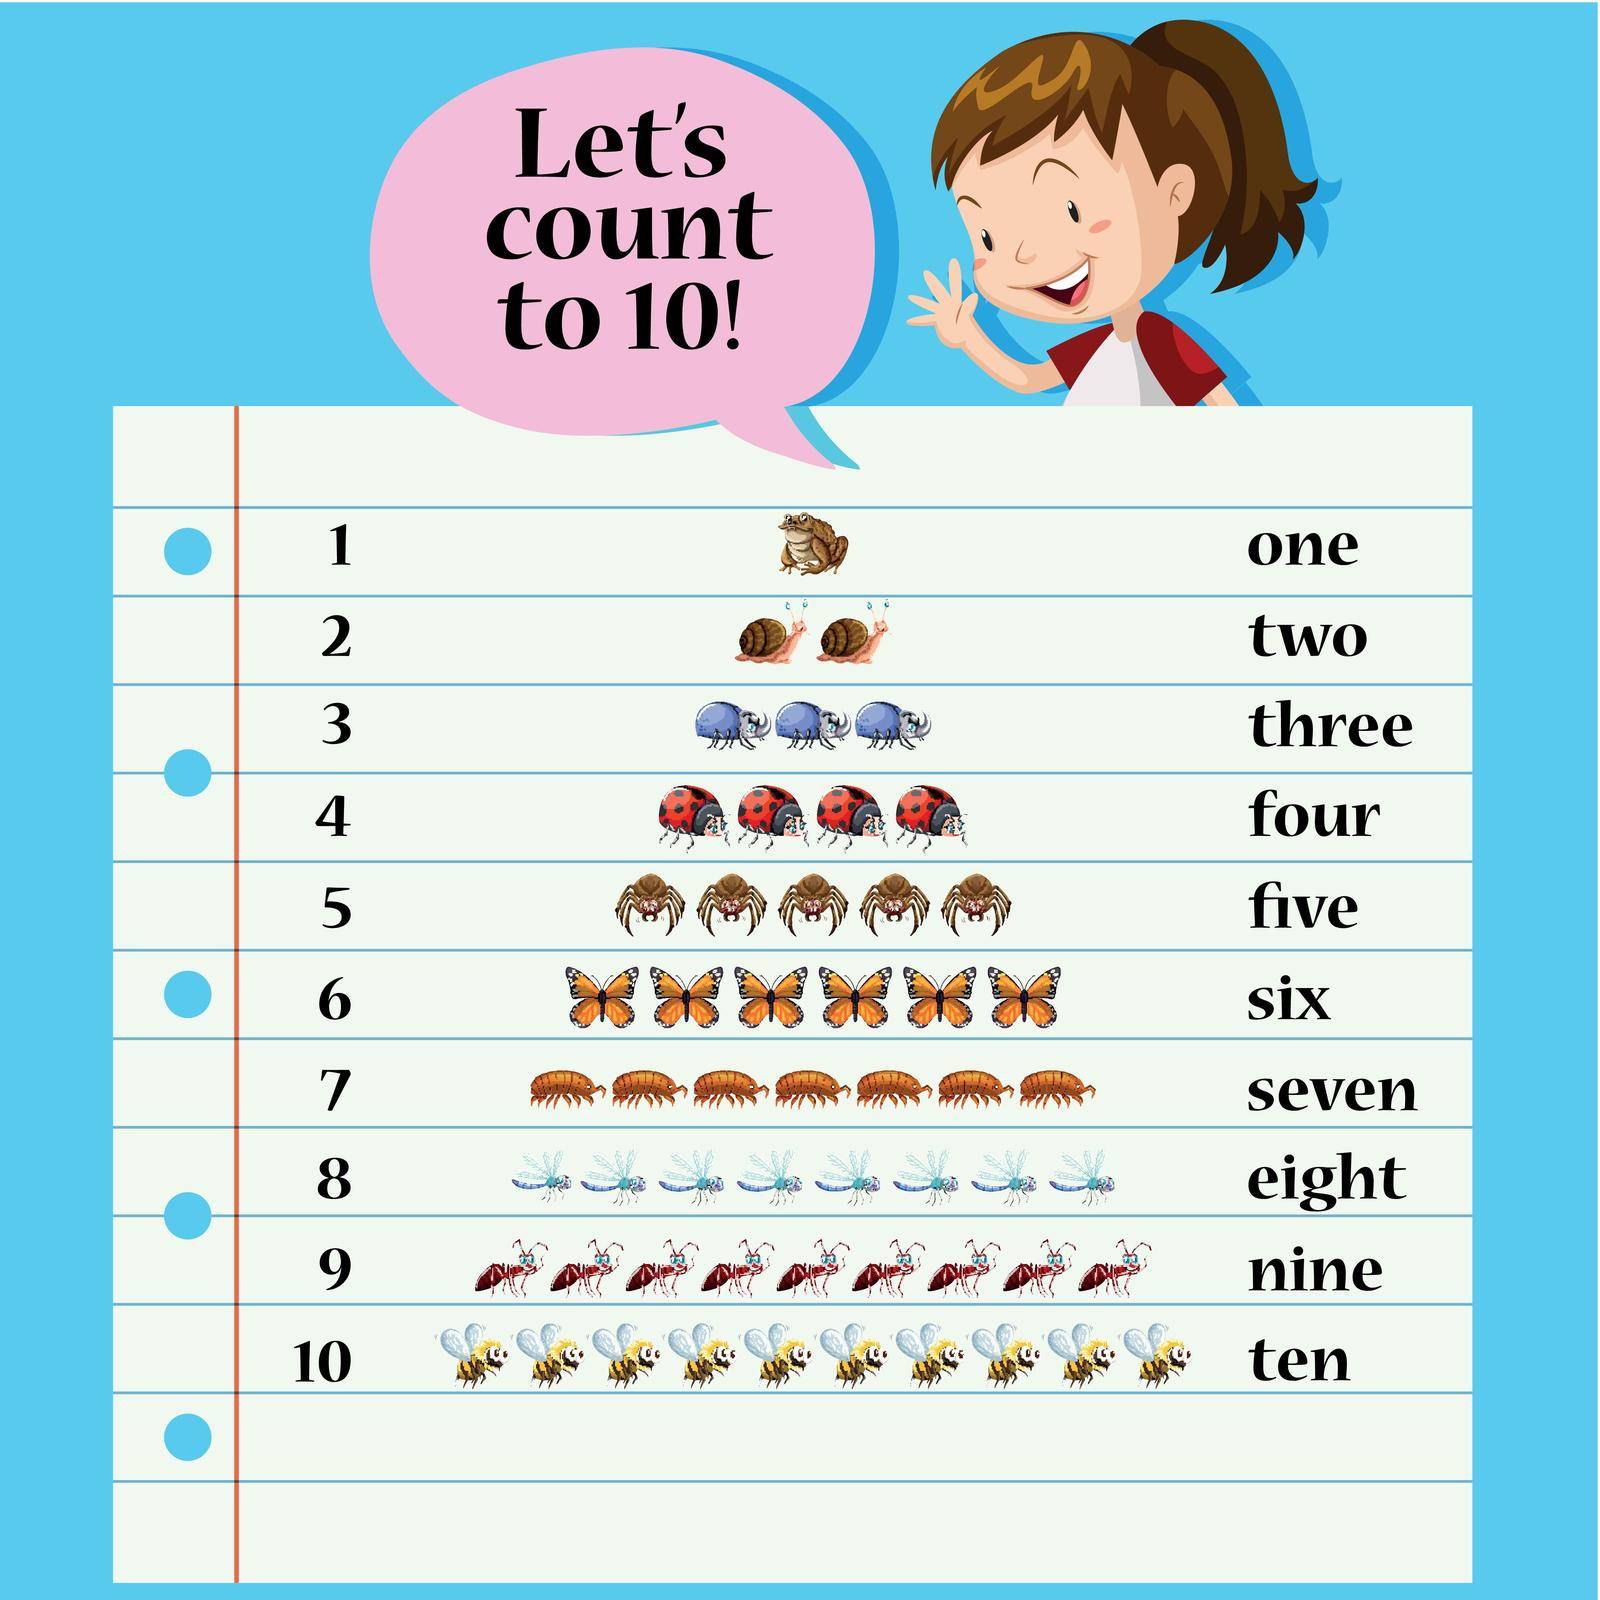 A math counting card by iimages